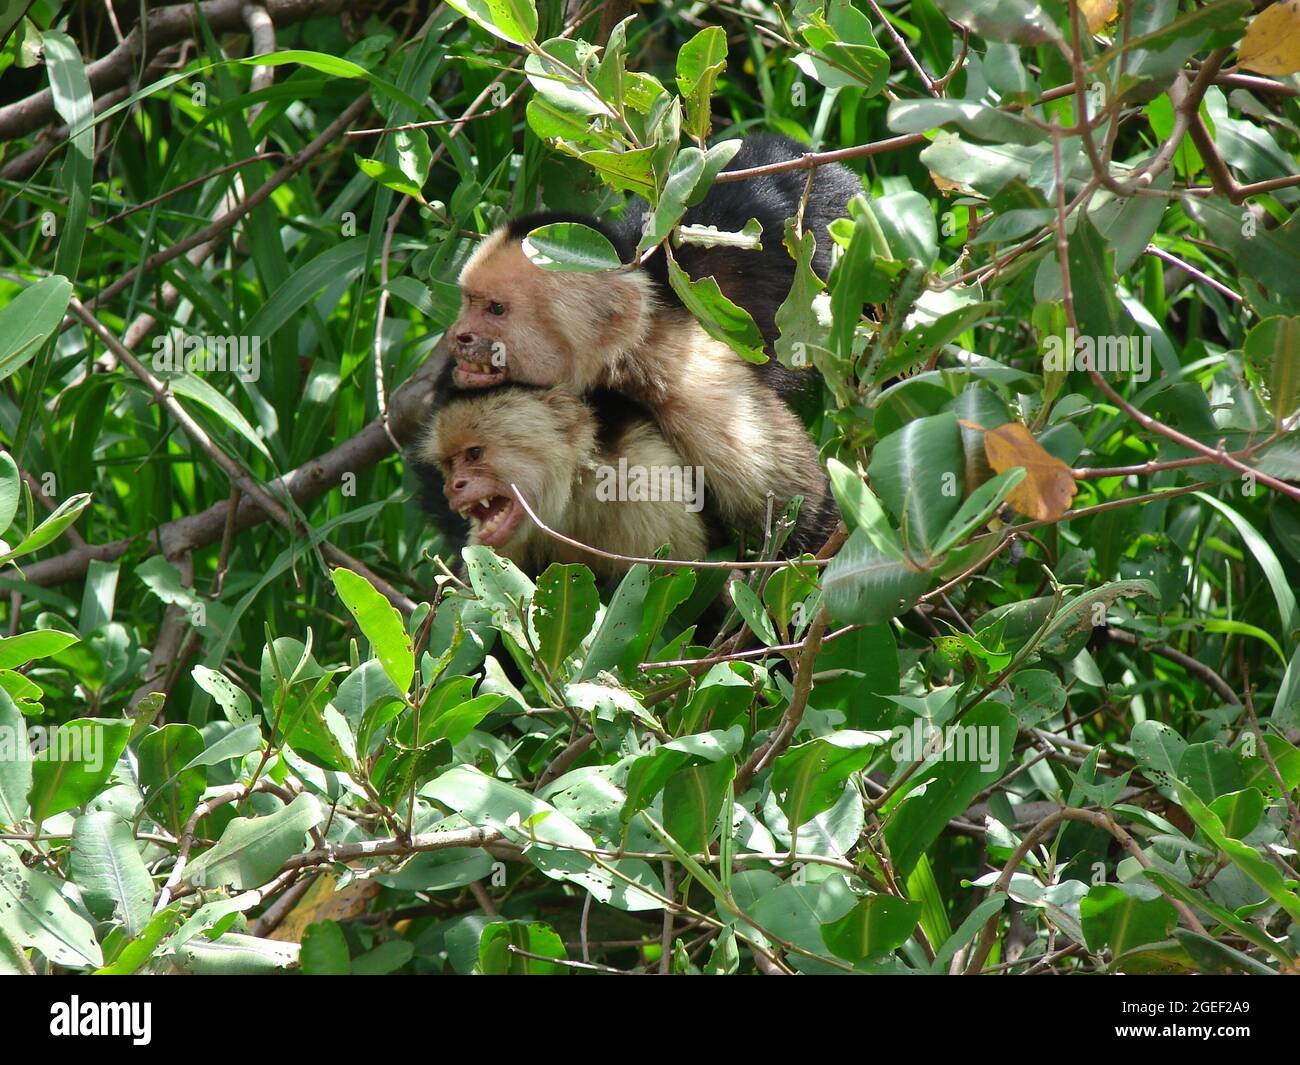 White-faced capuchin monkeys in Costa Rican forest Stock Photo